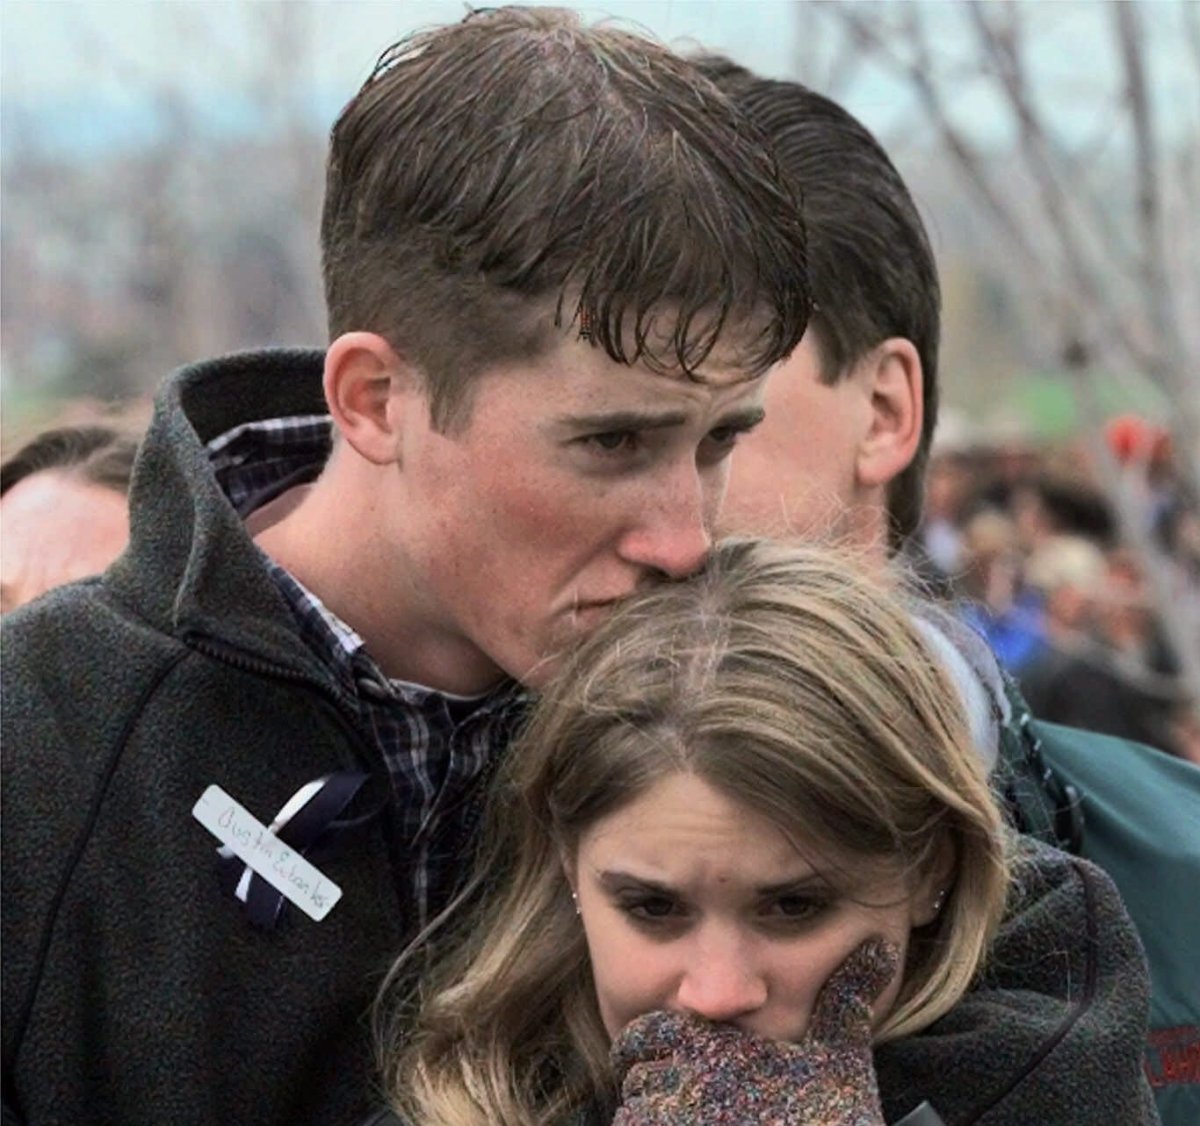 FILE - In this Sunday, April 25, 1999 file photo, shooting victim Austin Eubanks hugs his girlfriend during a community wide memorial service in Littleton, Colo., for the victims of the shooting rampage at Columbine High School the previous week. 